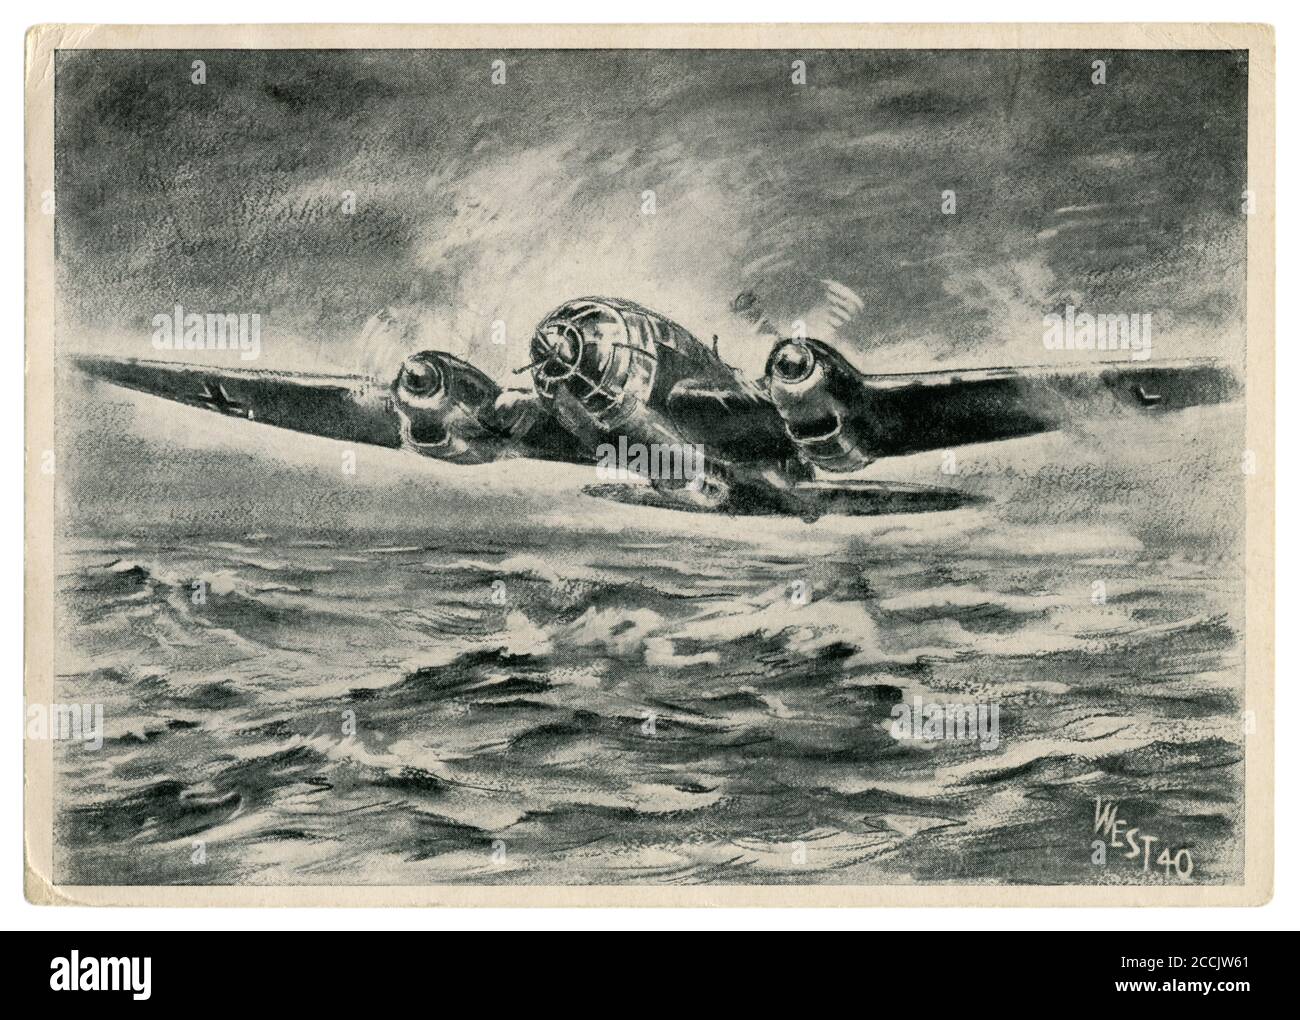 German historical postcard: a bomber Heinkel He 111 over the rough waters of the North sea is flying to bomb the cities of England. Battle of Britain Stock Photo